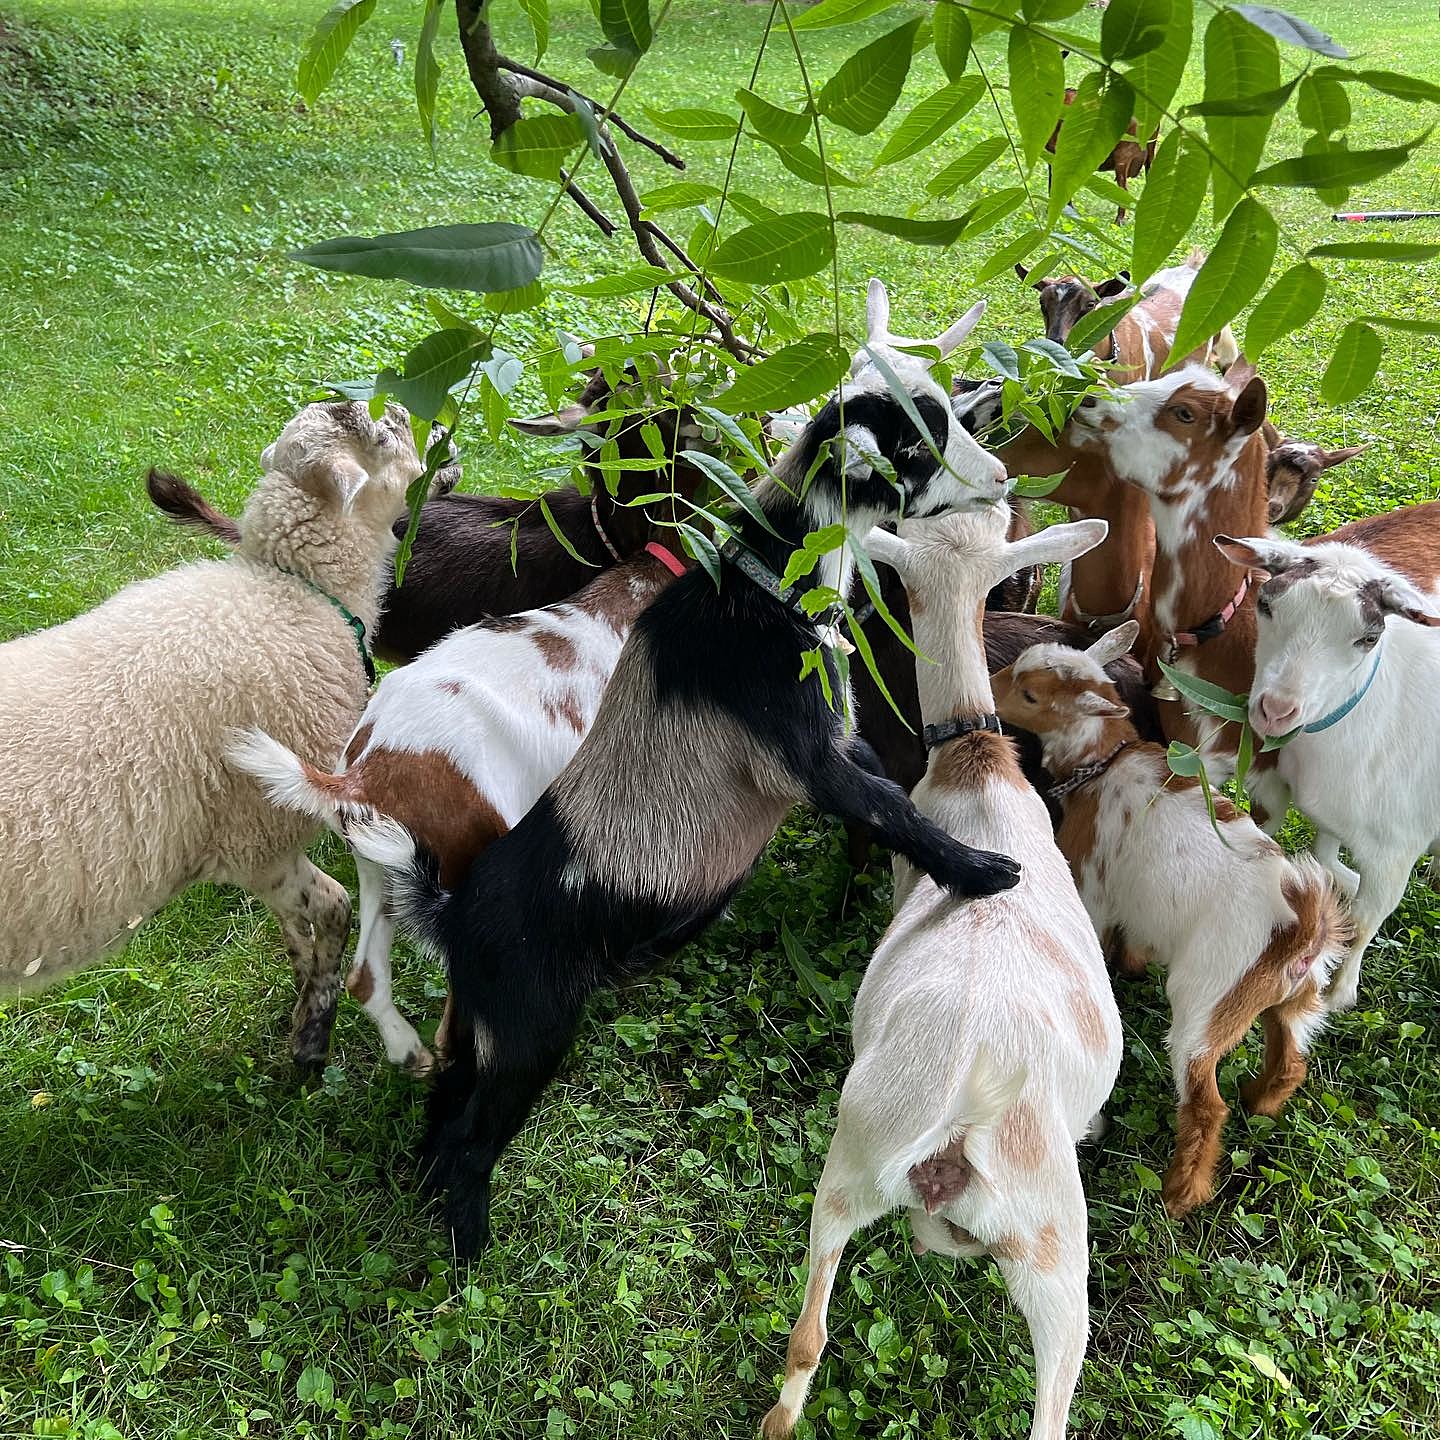 Yoga with goats craze: 4 other animals to namaste with, Health